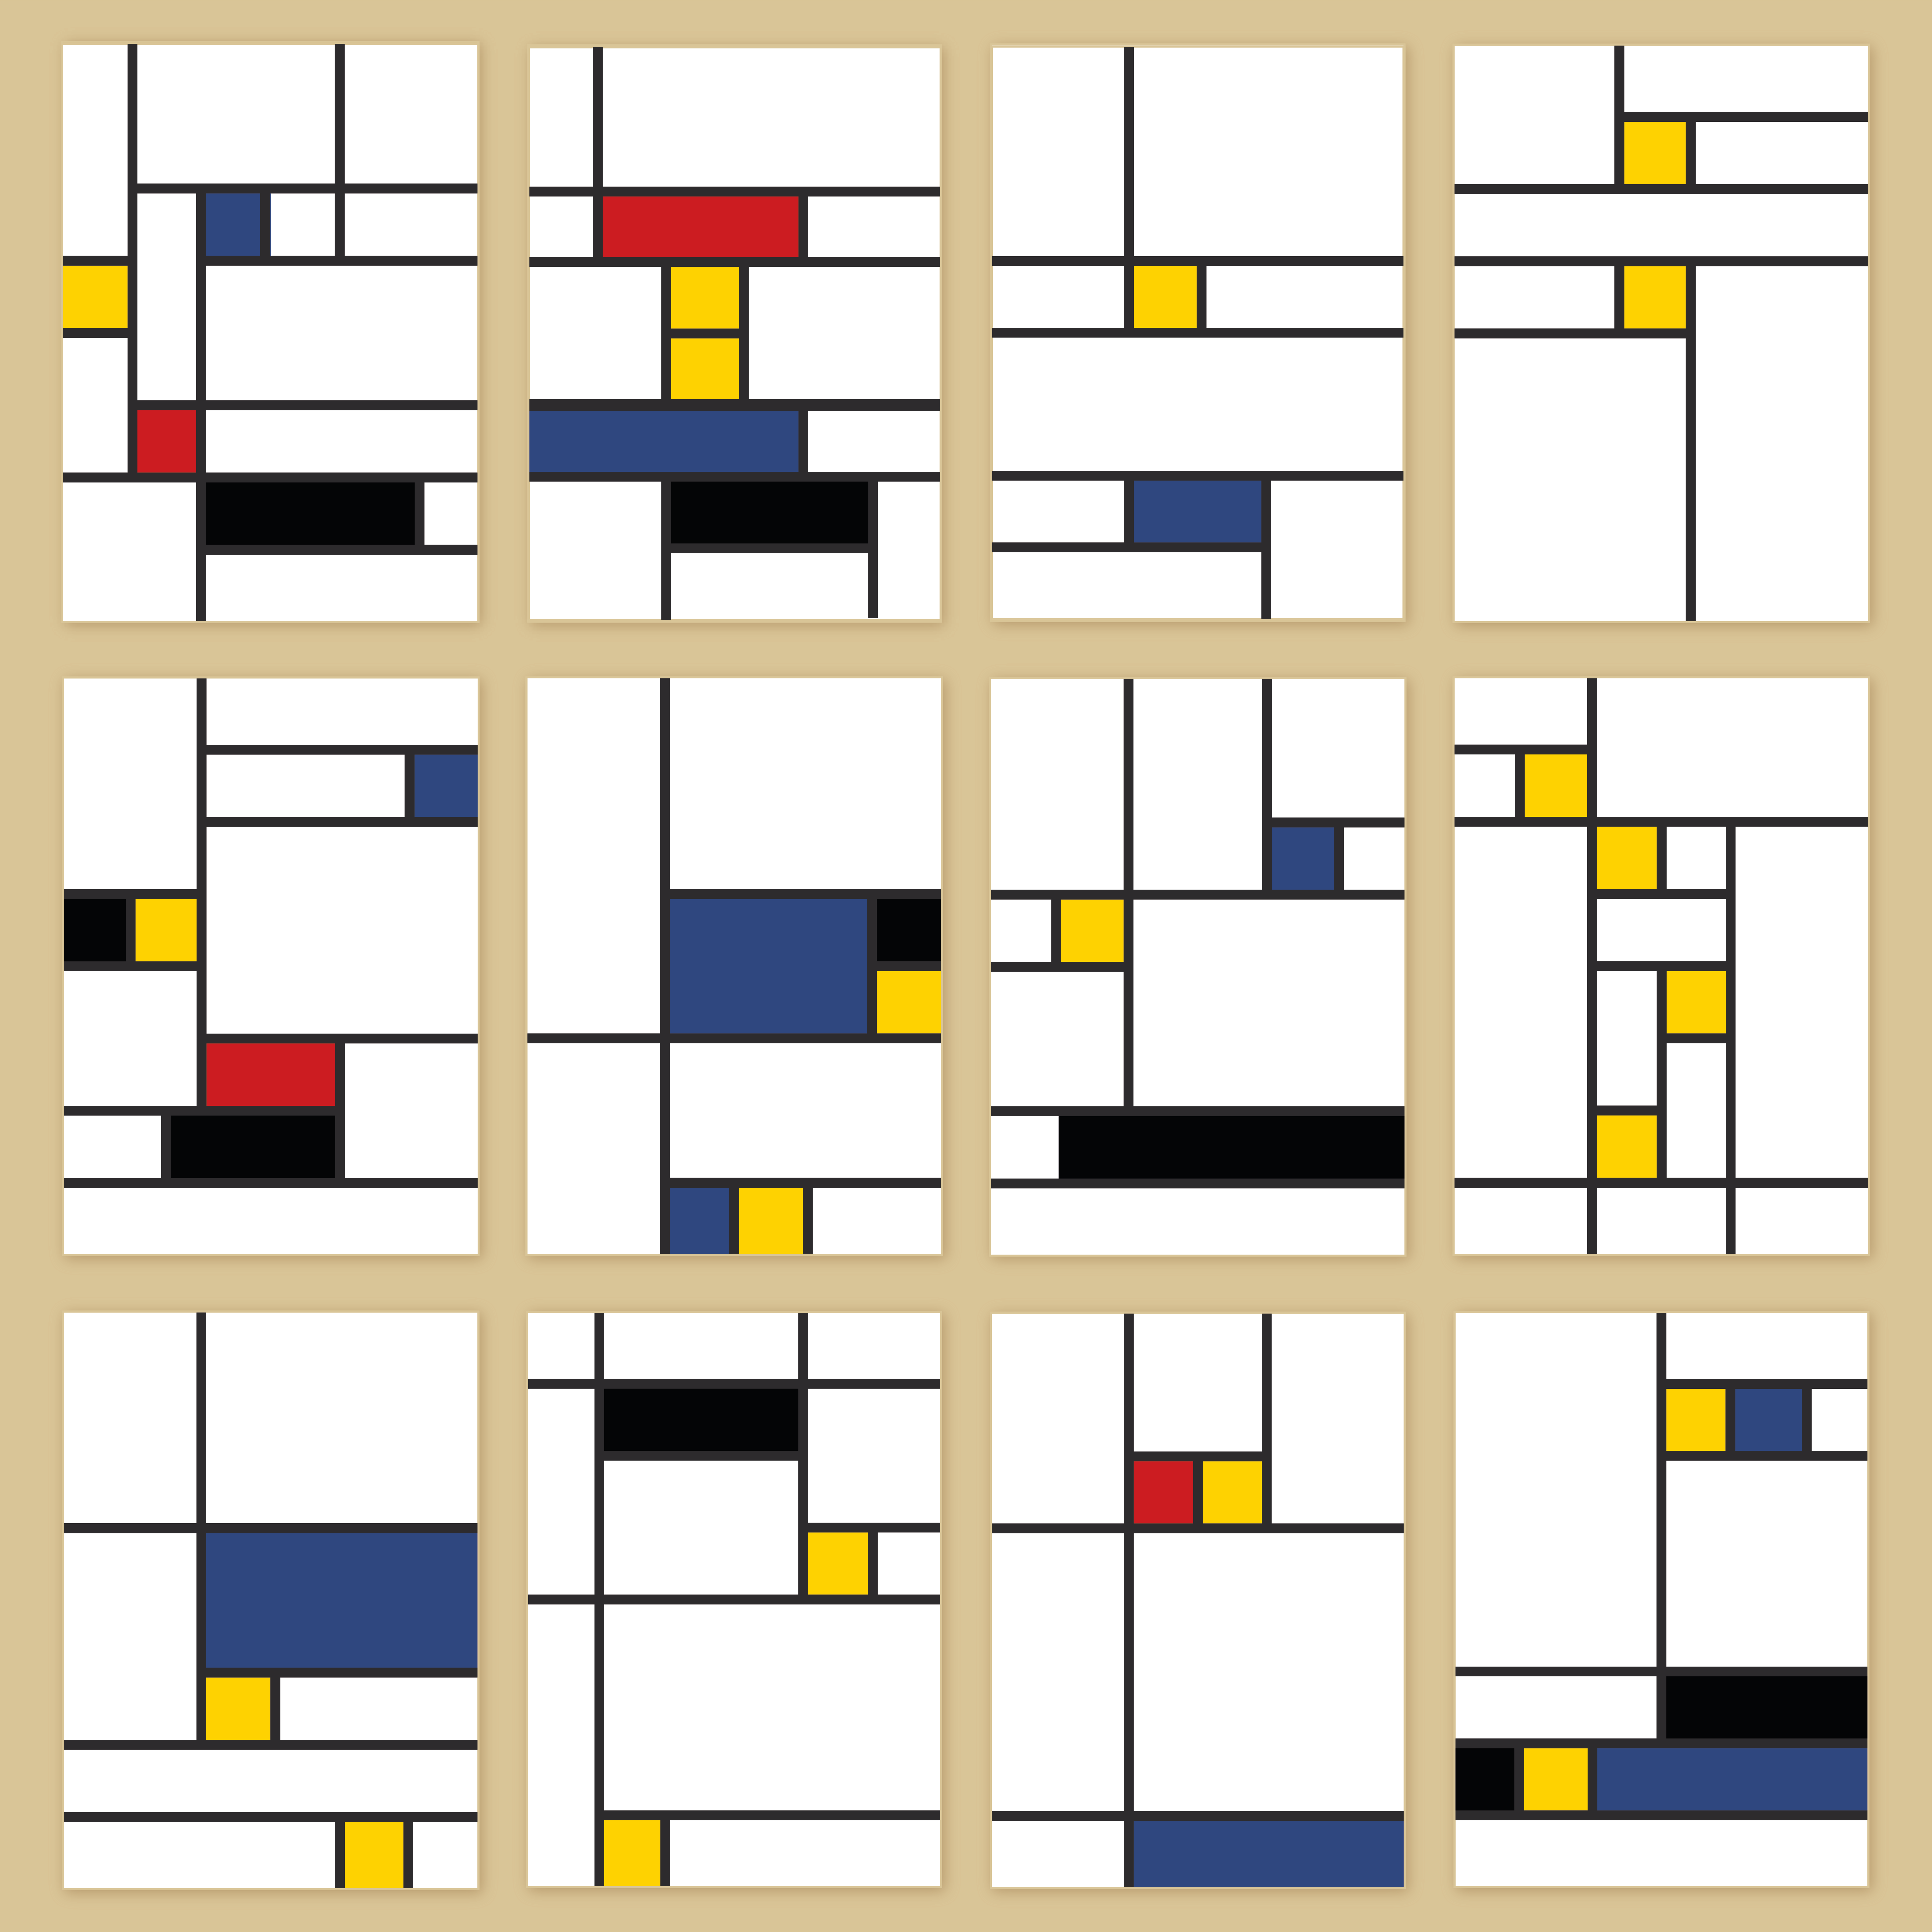 Creating a visual representation of my first 12 nights, drawing inspiration from Piet Mondrian's art style.